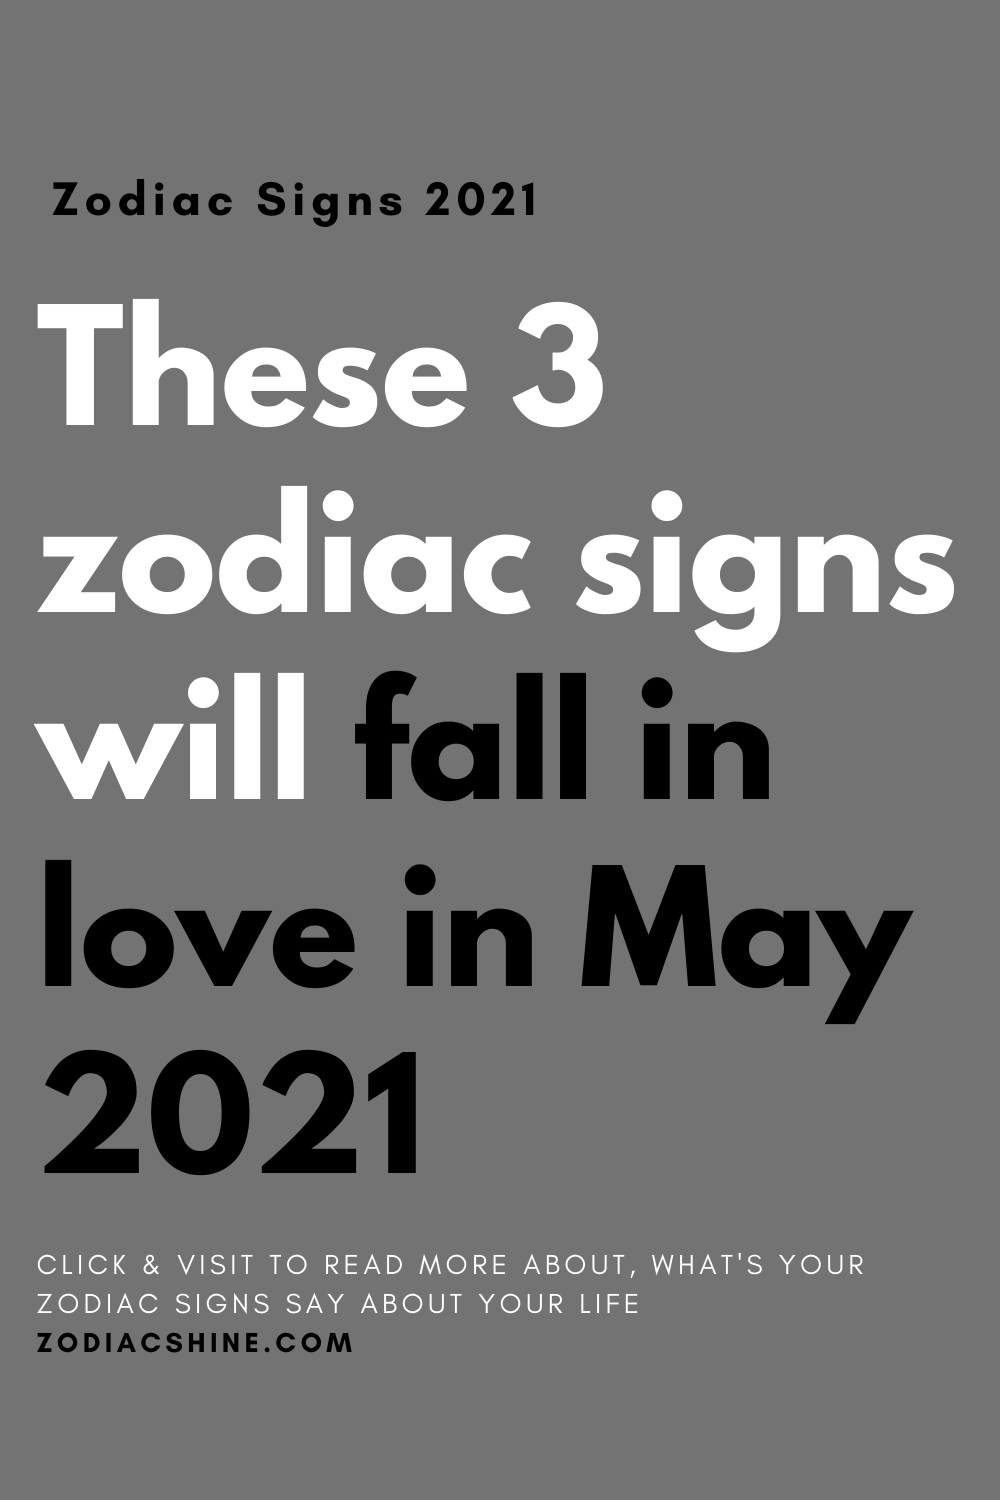 These 3 zodiac signs will fall in love in May 2021